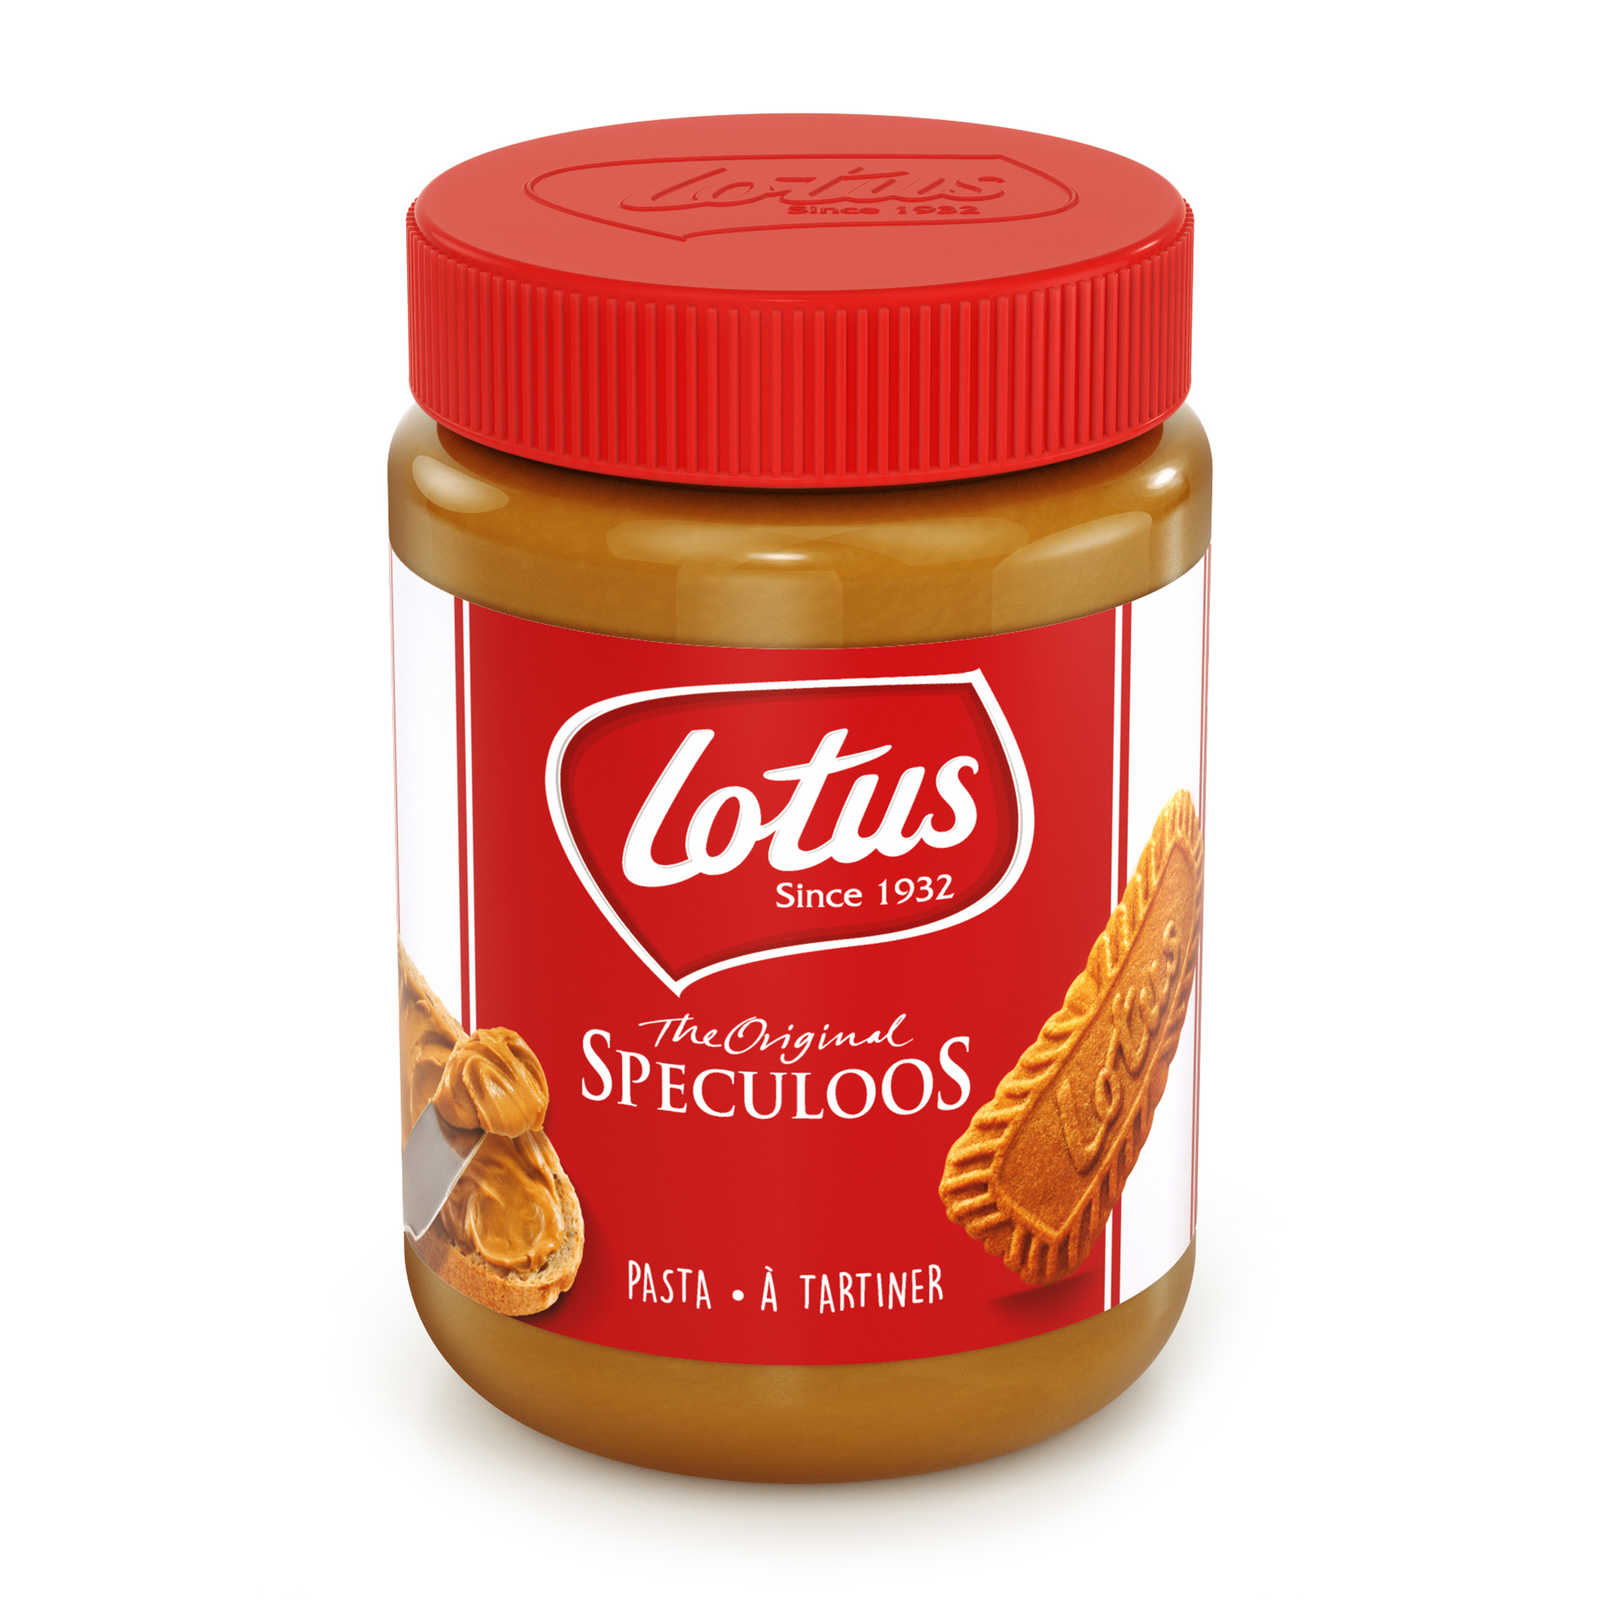 https://www.goodepices.com/image/19311-1-l/Lotus+P%C3%A2te+%C3%A0+tartiner+speculoos+400gr-1.jpg